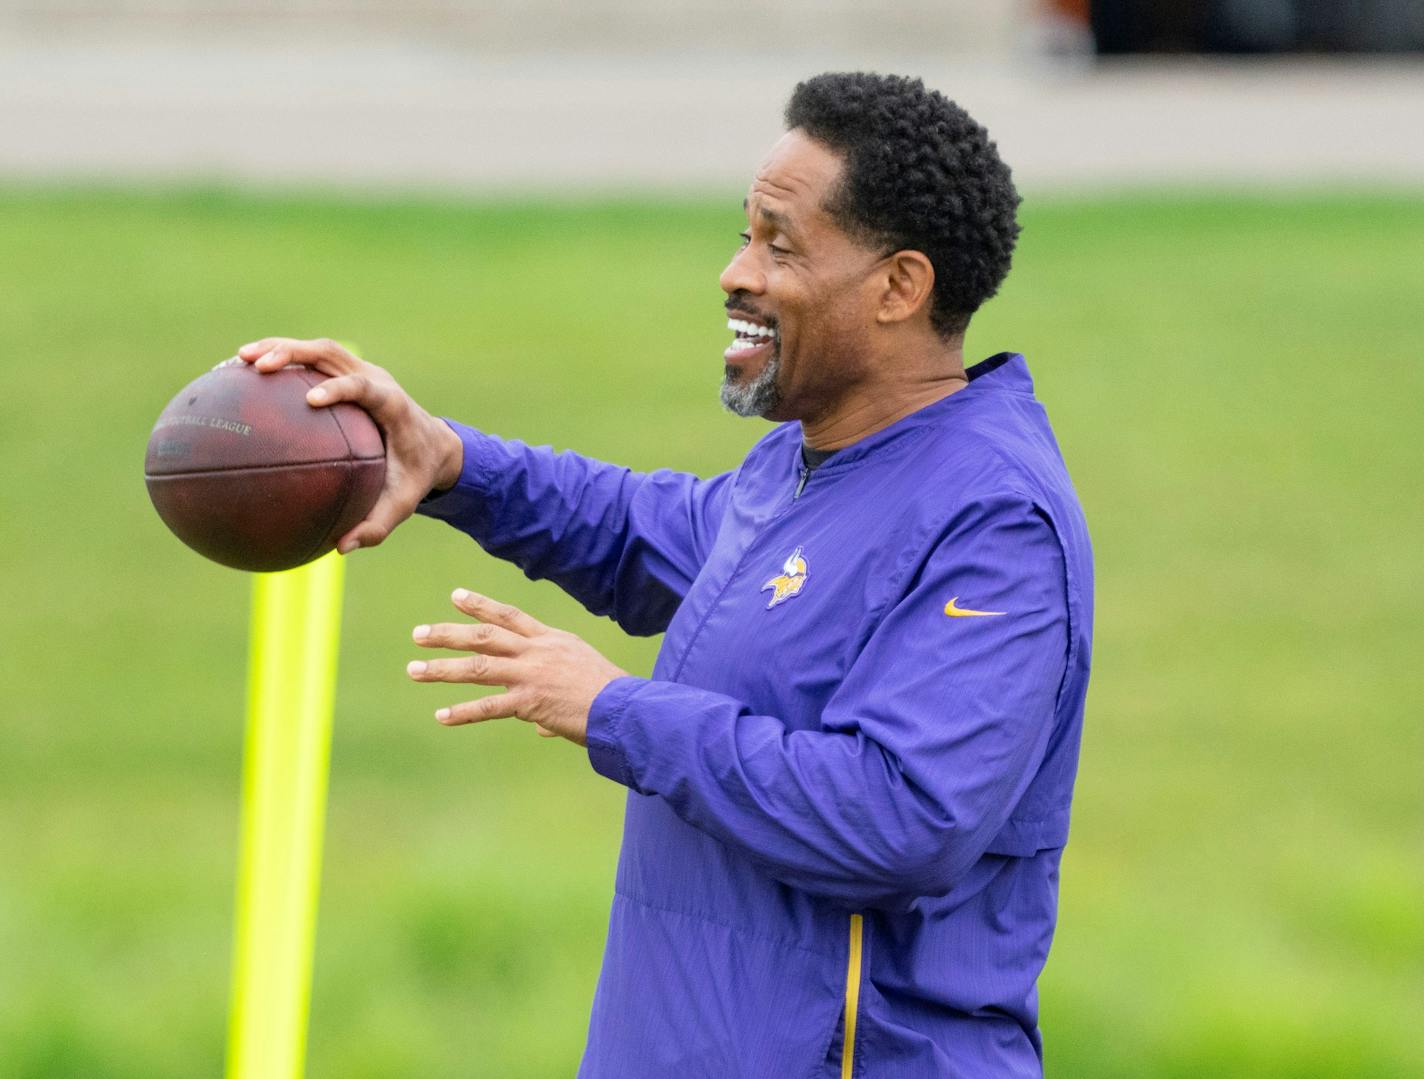 Minnesota Vikings wide receivers coach Keenan McCardell chats with other coaches during Vikings Mini Camp Tuesday, June 7, 2022 at TCO Performance Center in Eagan, Minn. ]